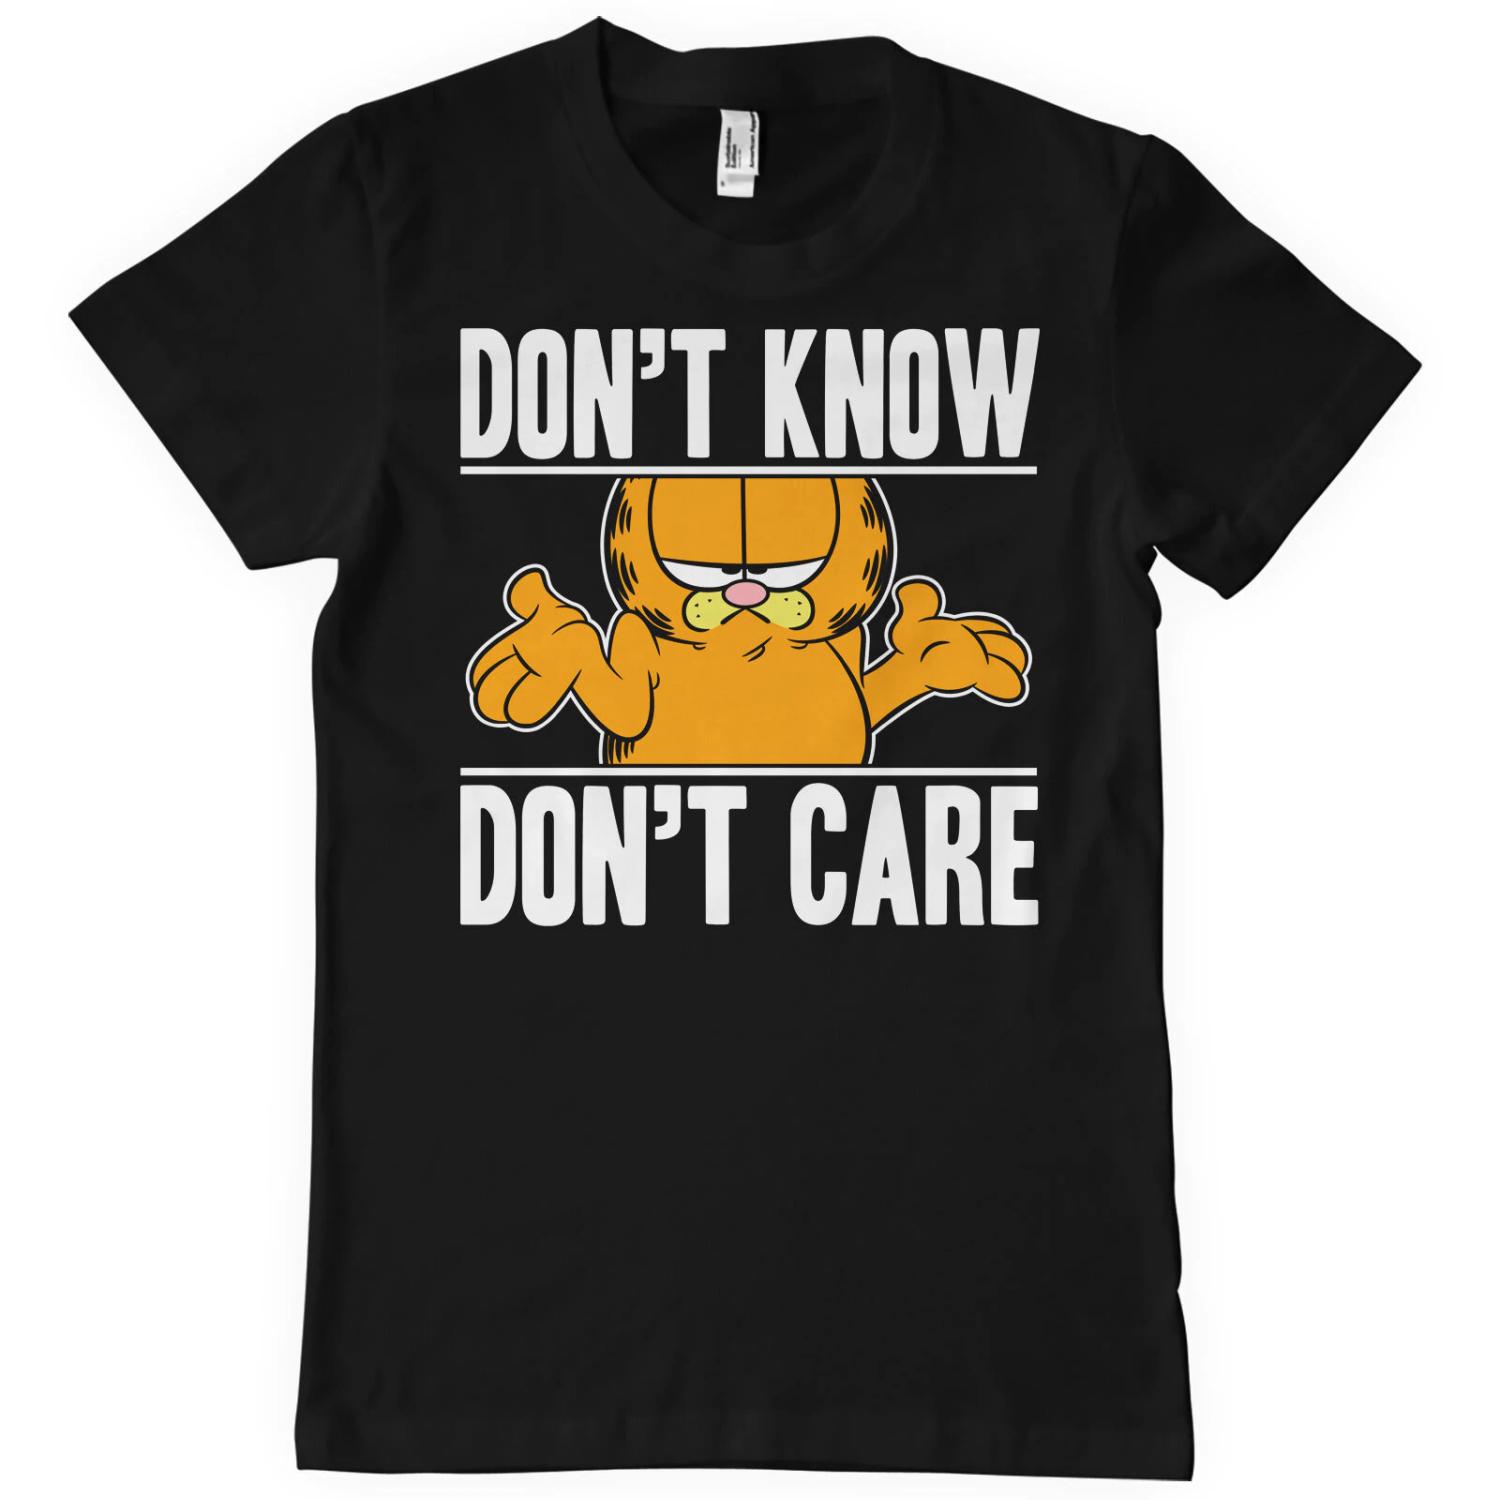 Garfield - Don't know- T-shirt